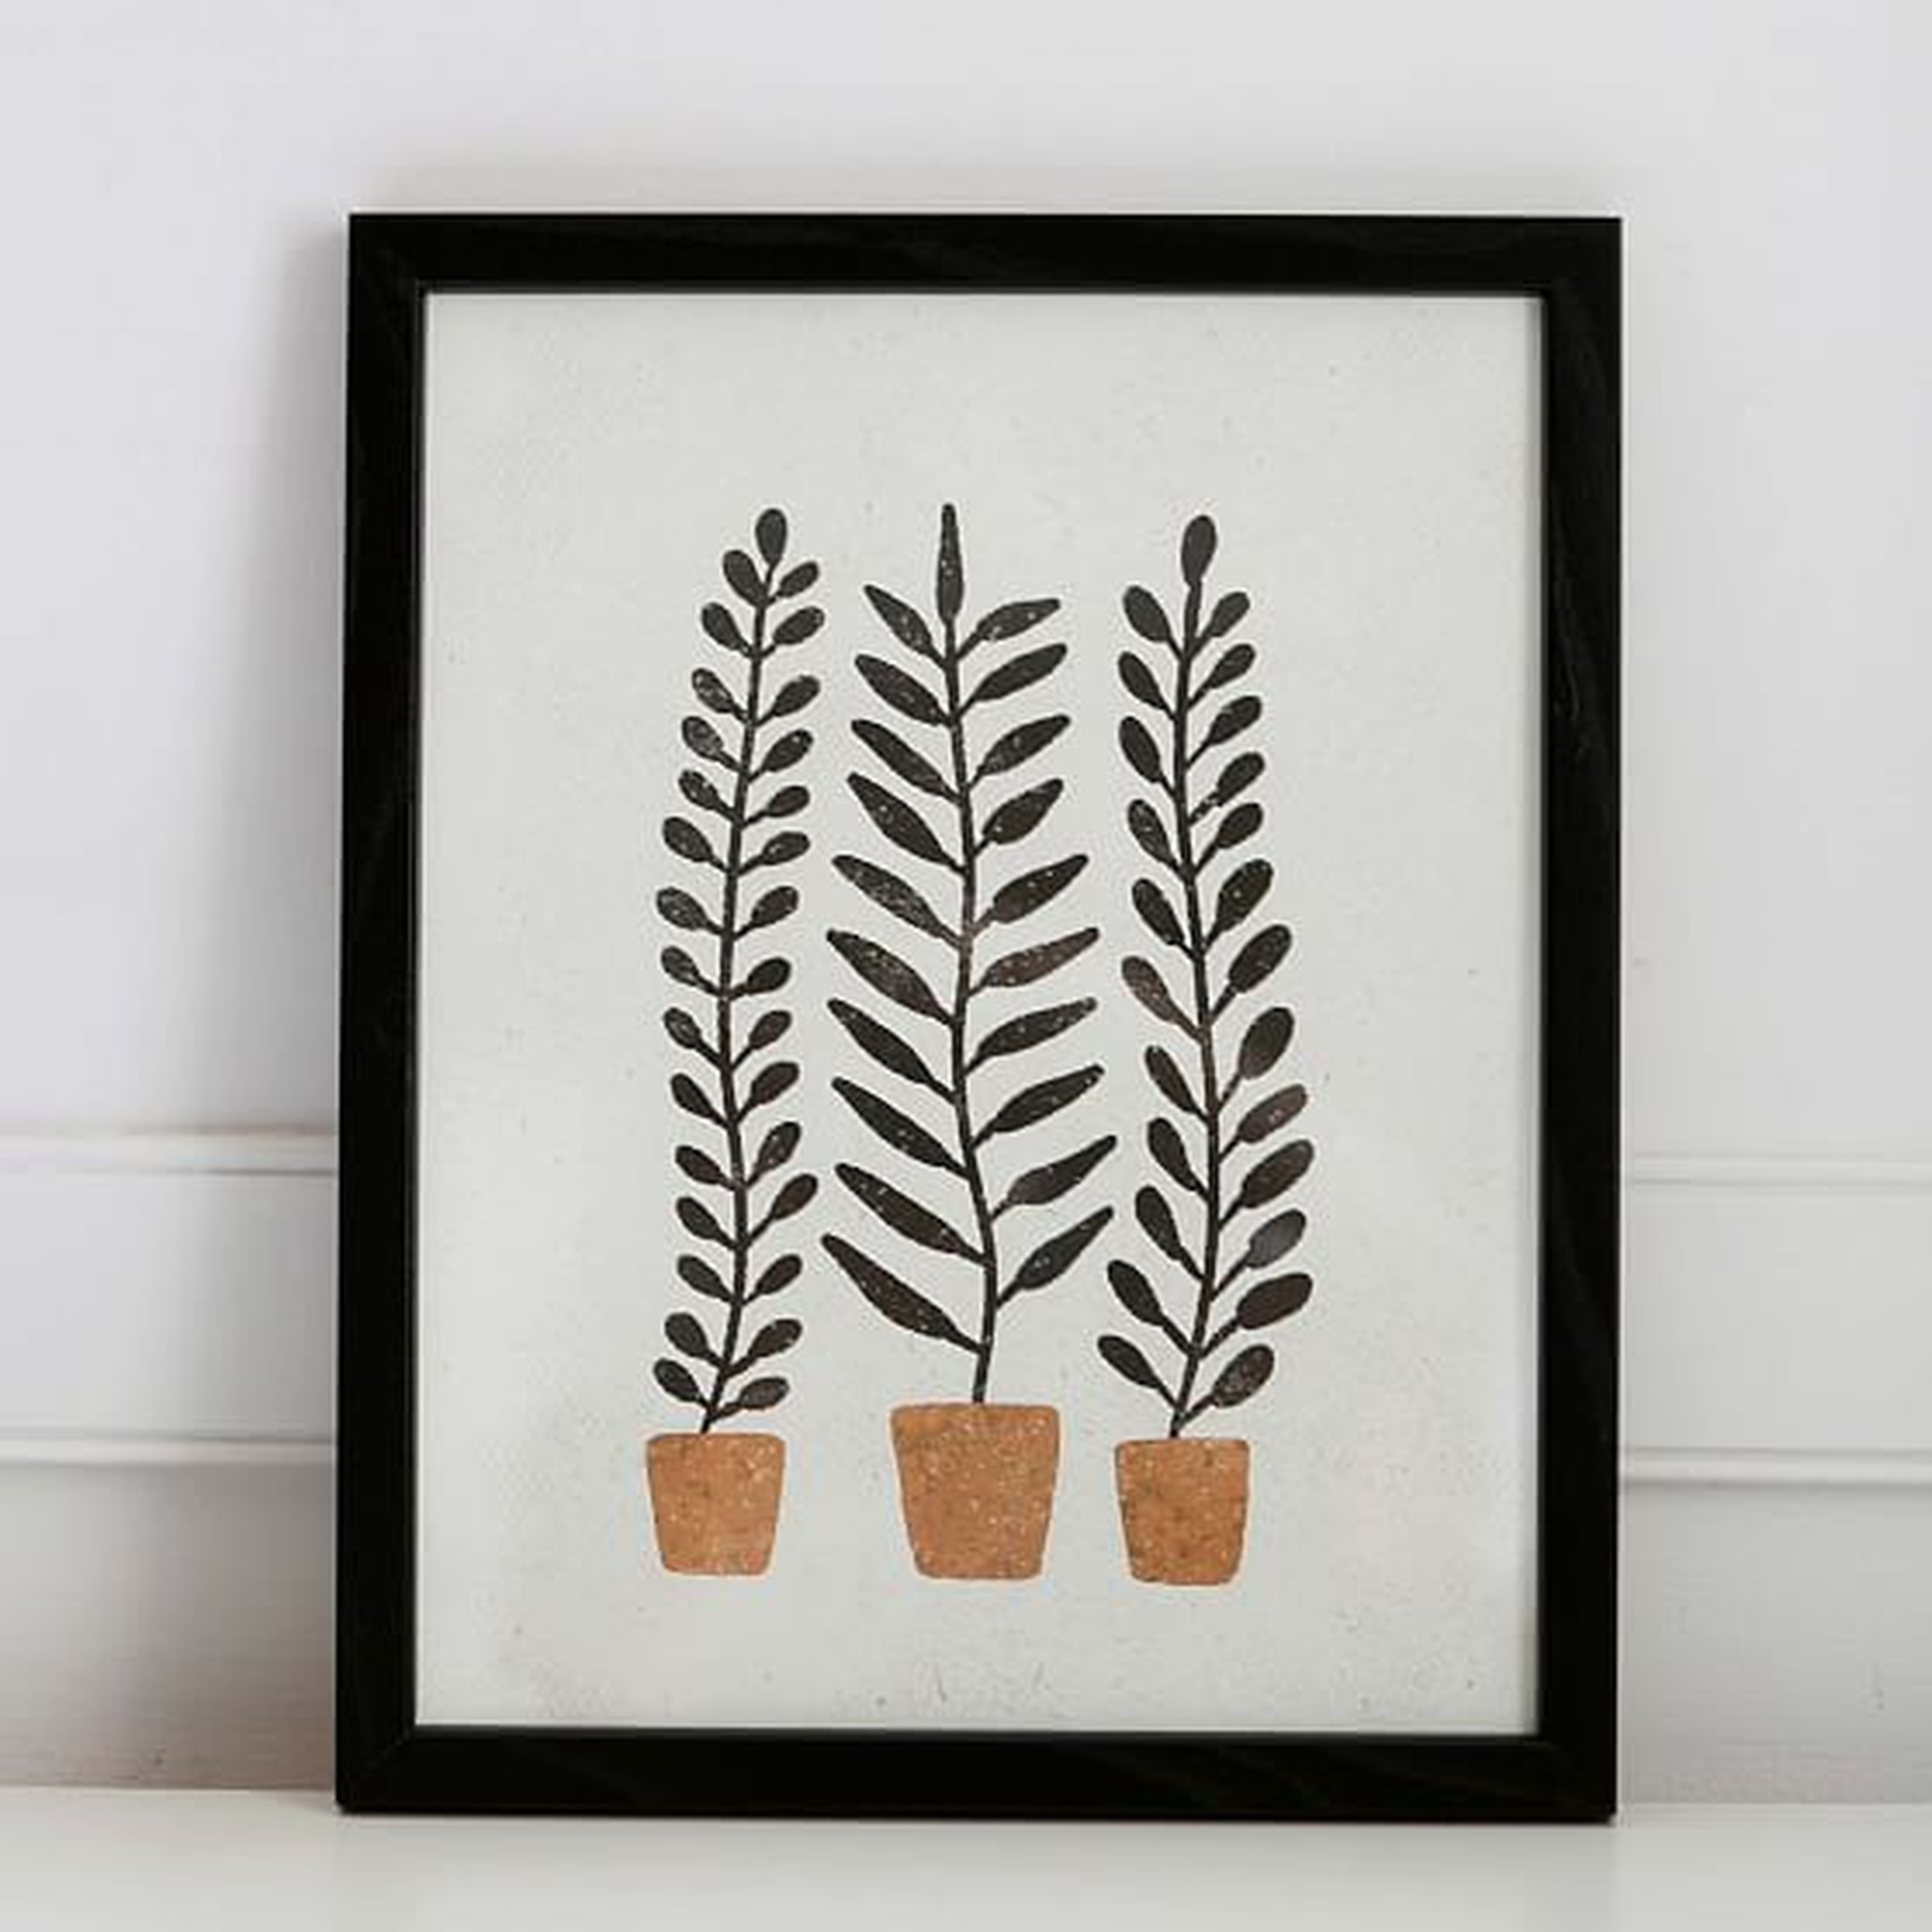 Pauline Stanley Studio Wall Art, Potted Ferns, Black Acrylic Frame, Earthy &amp; Natural - West Elm